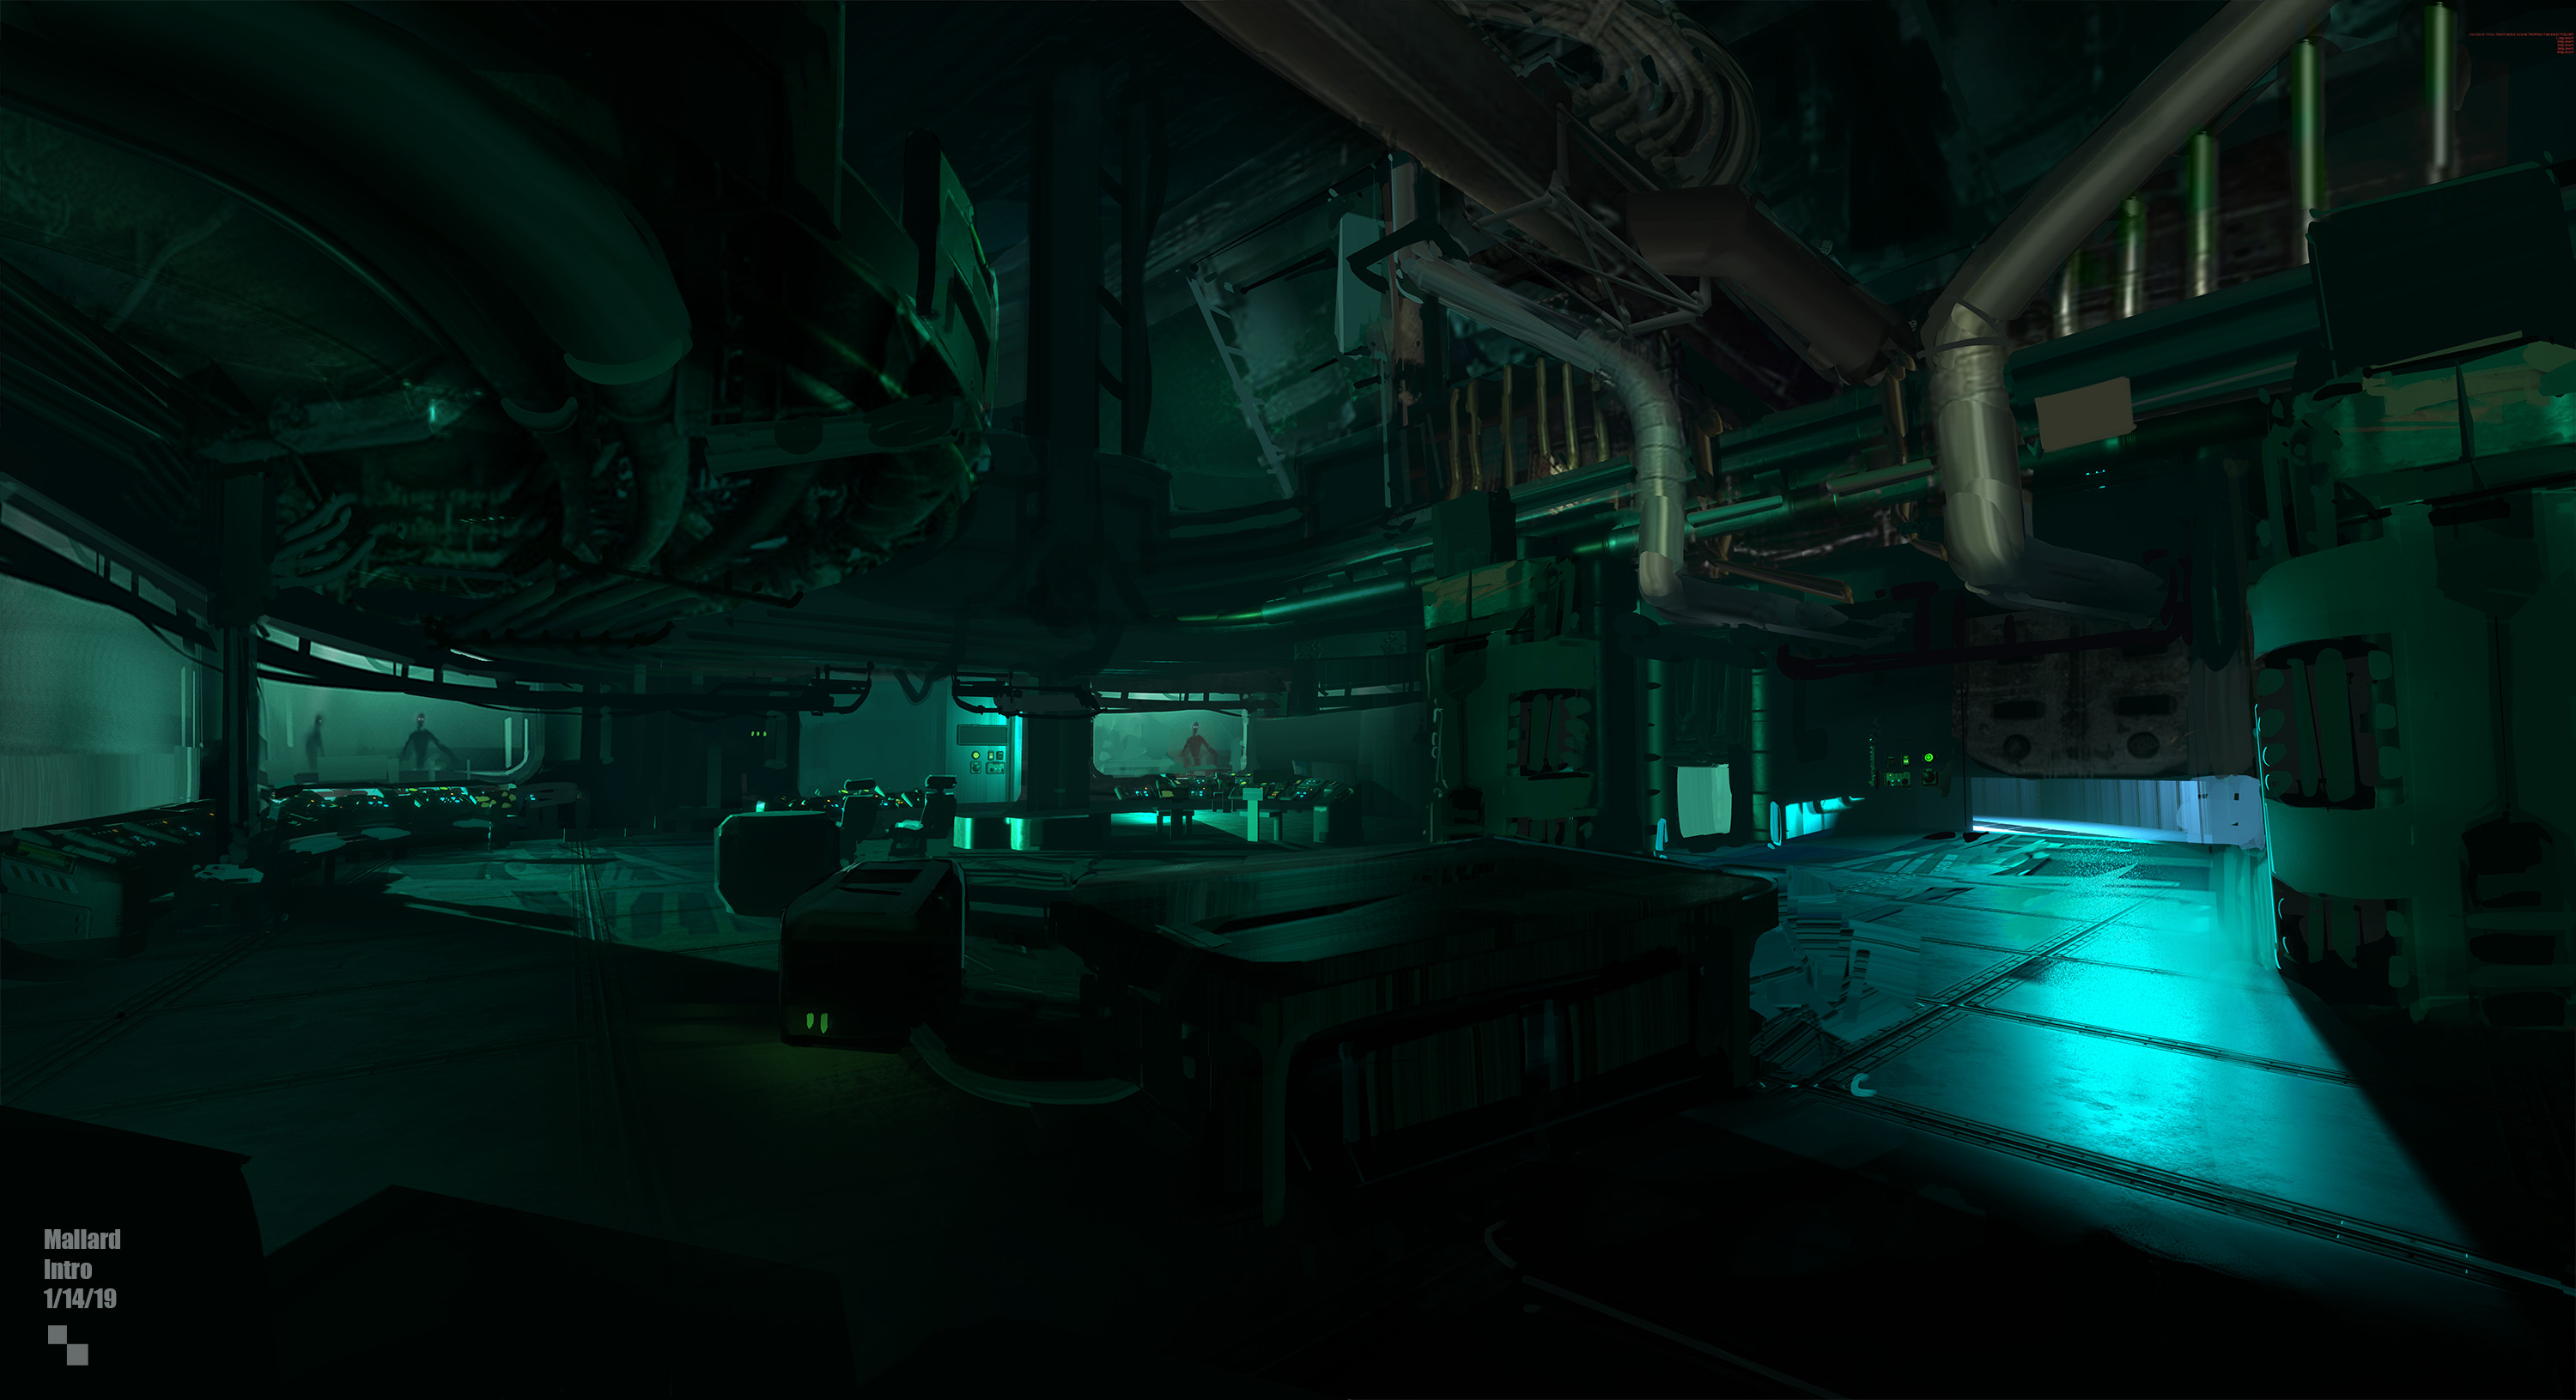 I began with paint over from existing assets in a grey box mockup of the level in Unreal.  Most of this scene was greybox.  After setting up and lighting the scene I would paint over in photoshop to define mood and assets for callout.